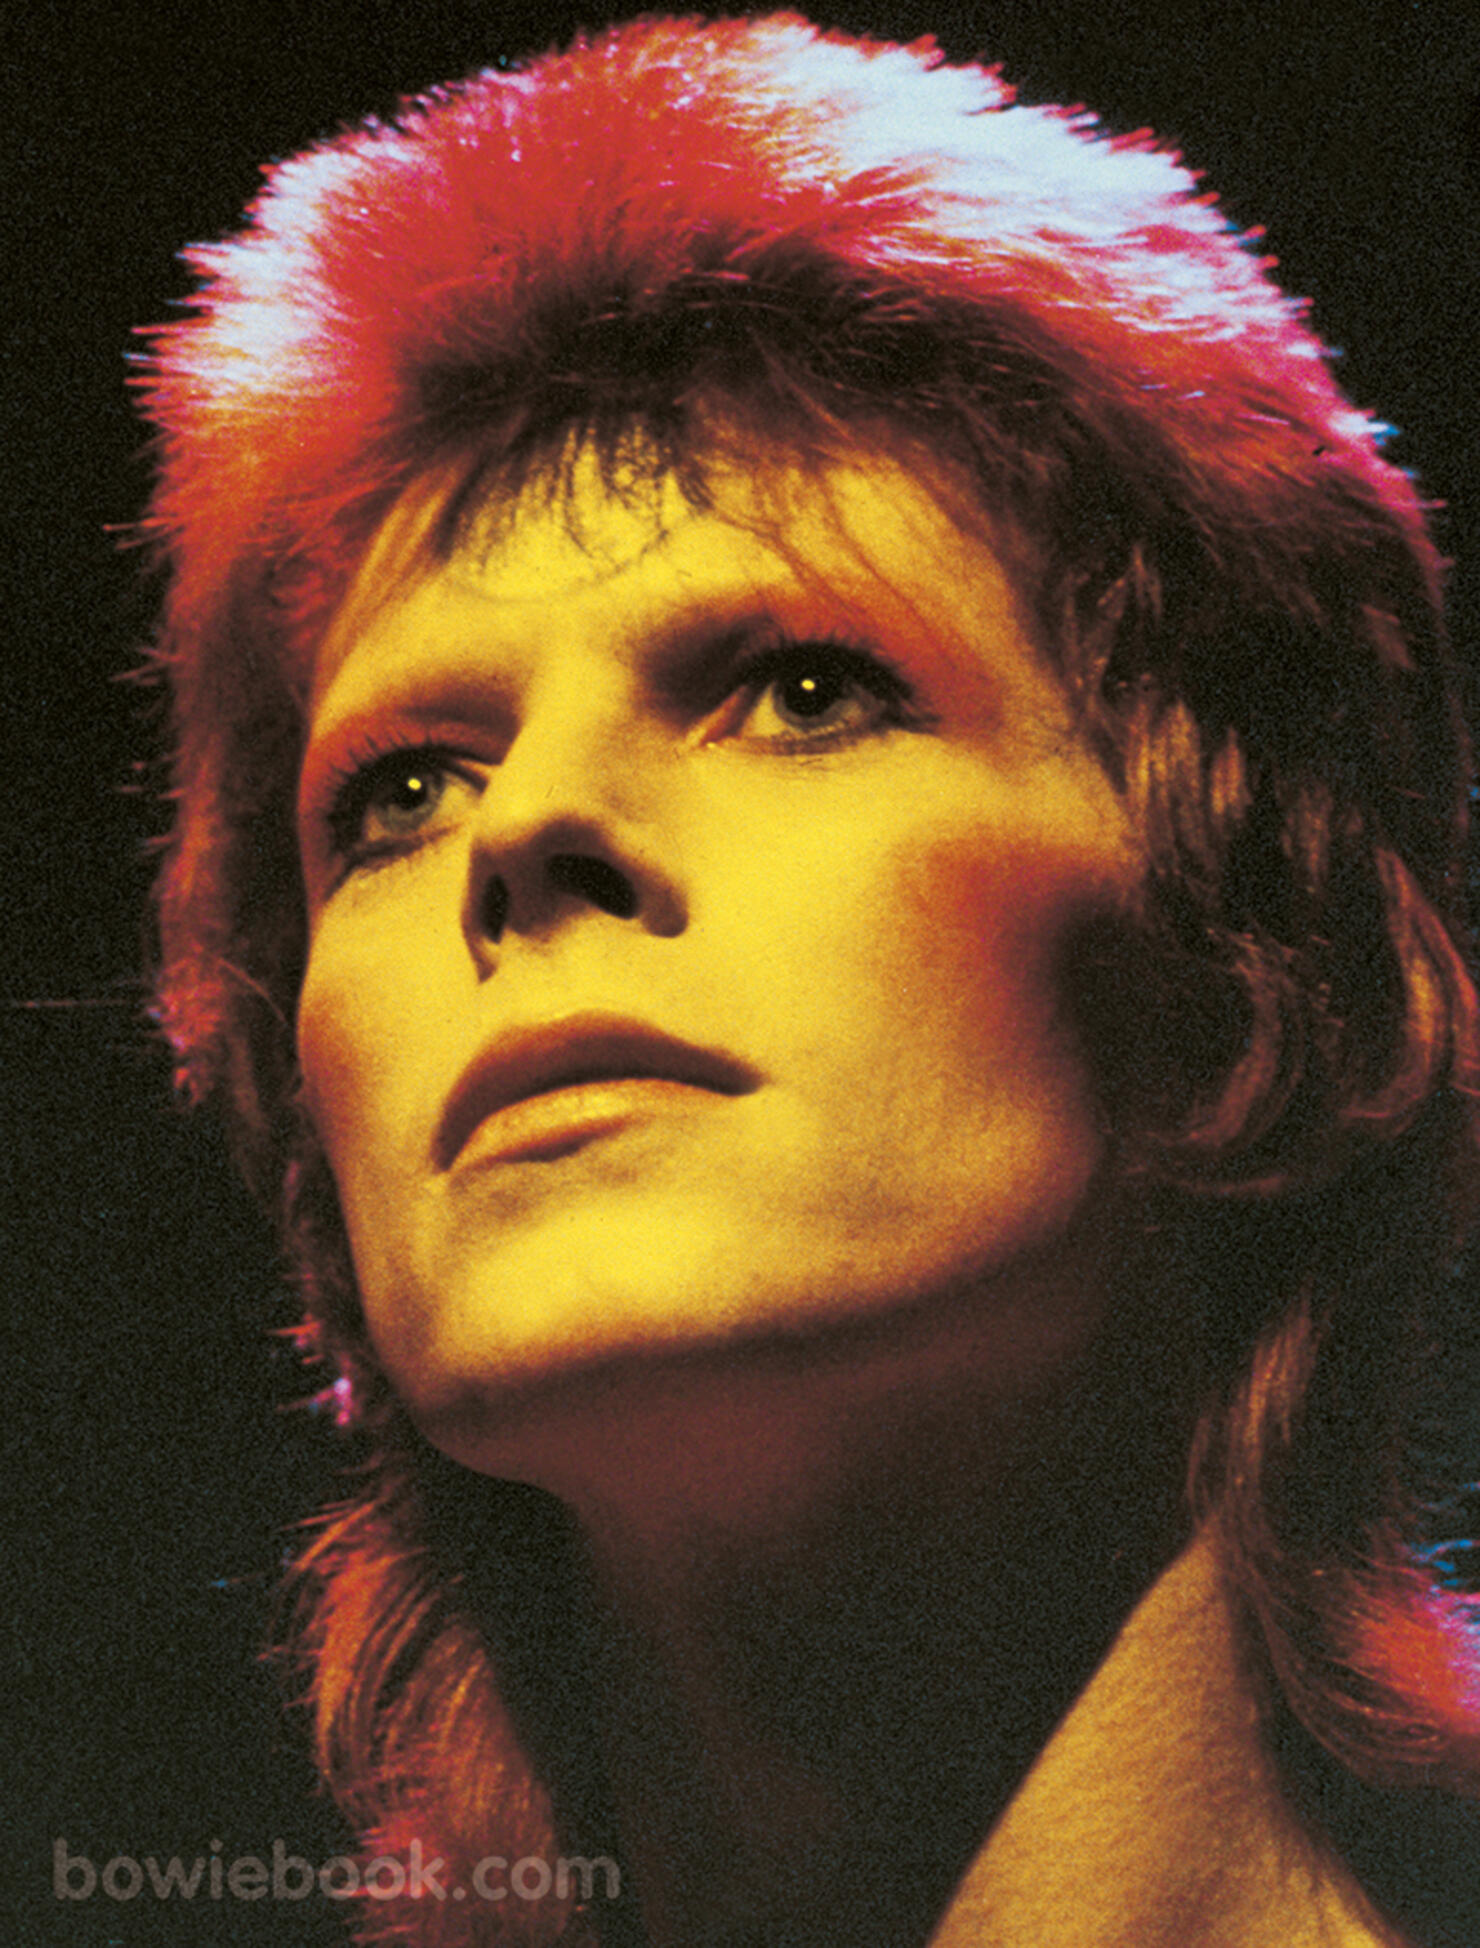 David Bowies Ziggy Stardust Biography Gets Anniversary Edition Reissue Iheart 5081